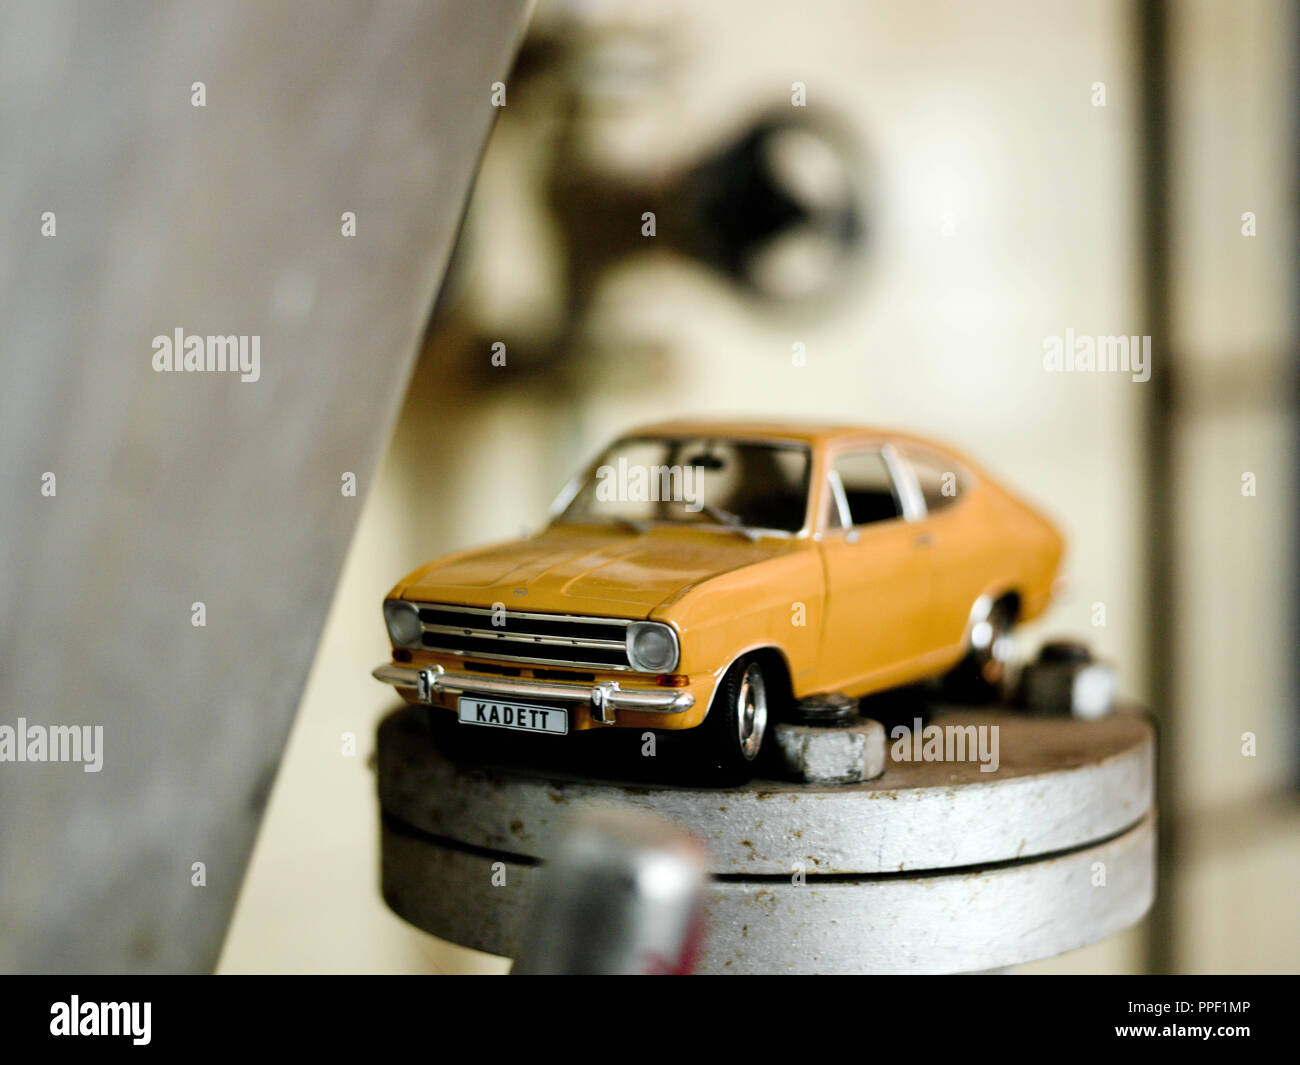 Christian Förster offers assisted parking for vintage cars in Germering, Germany. Close up of an Opel Kadett miniature Stock Photo